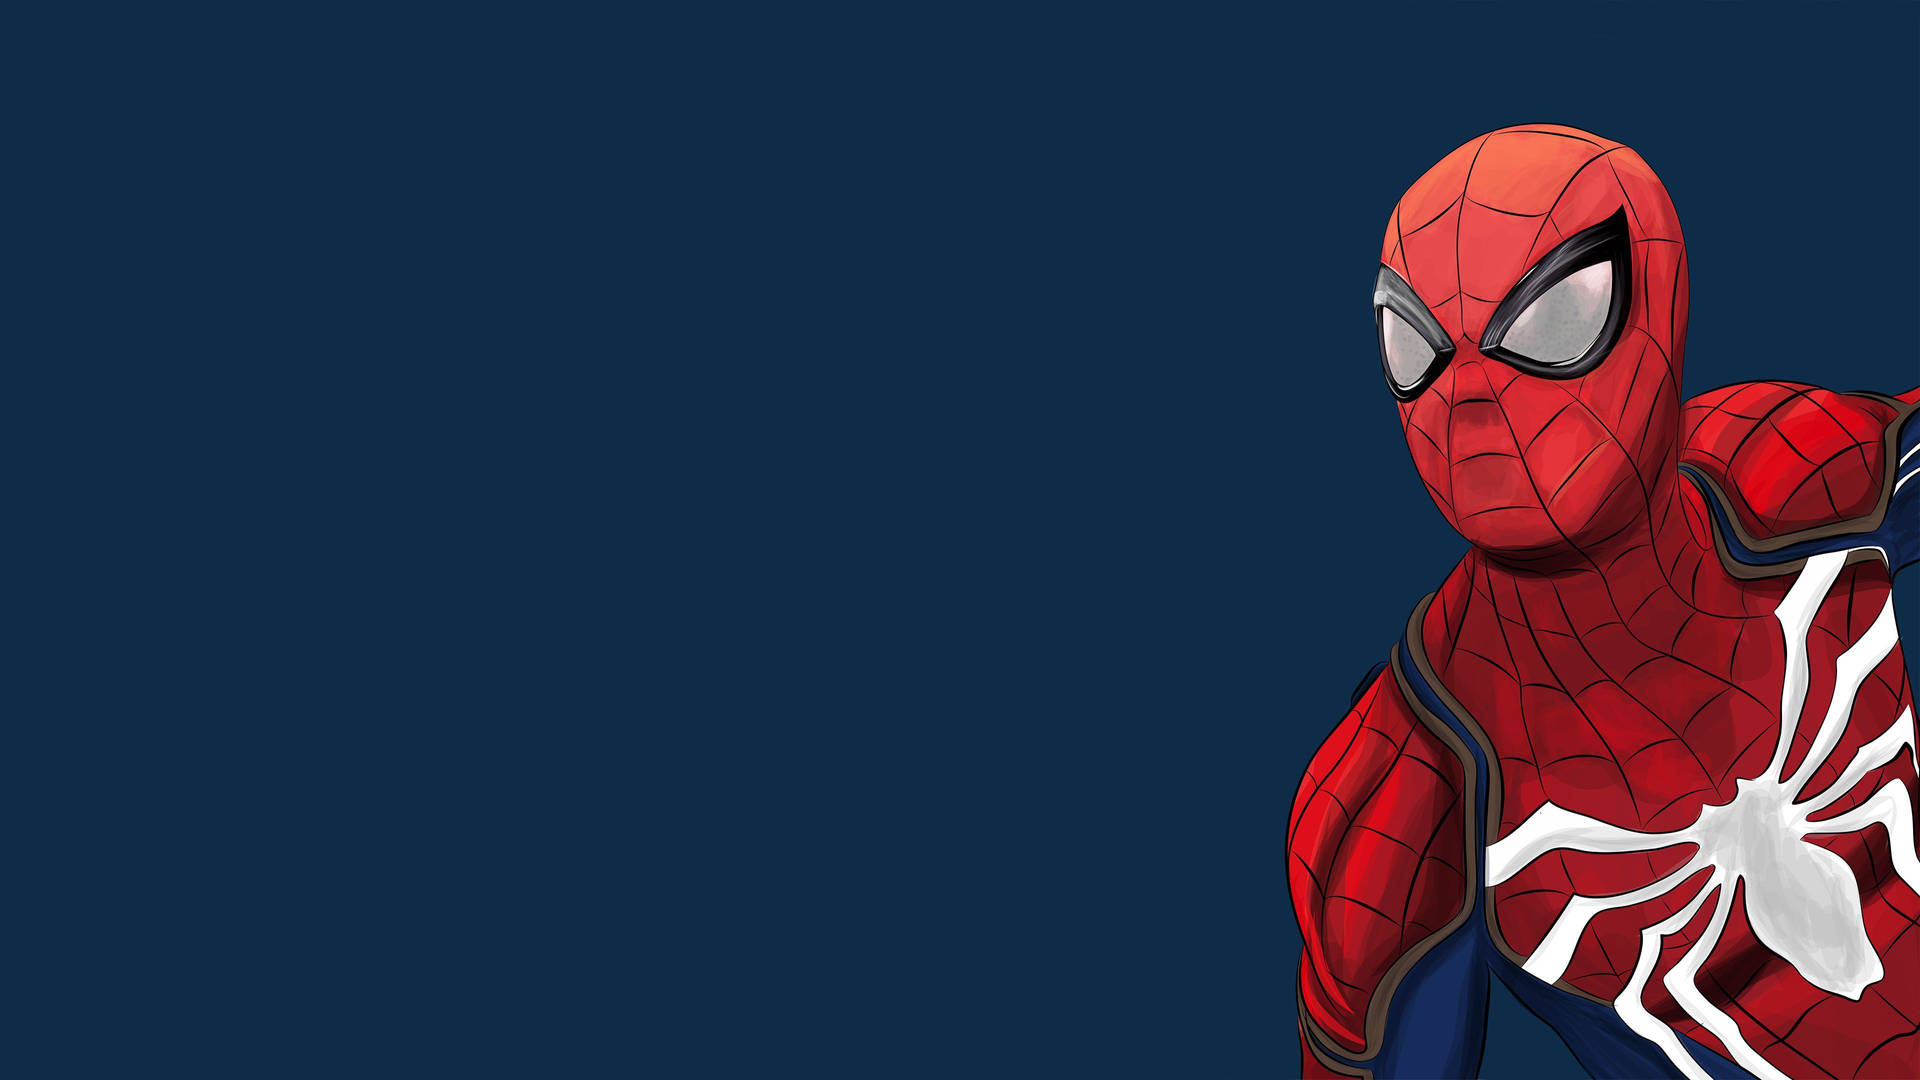 Spiderman with his red costume showing in the corner on a dark blue background.